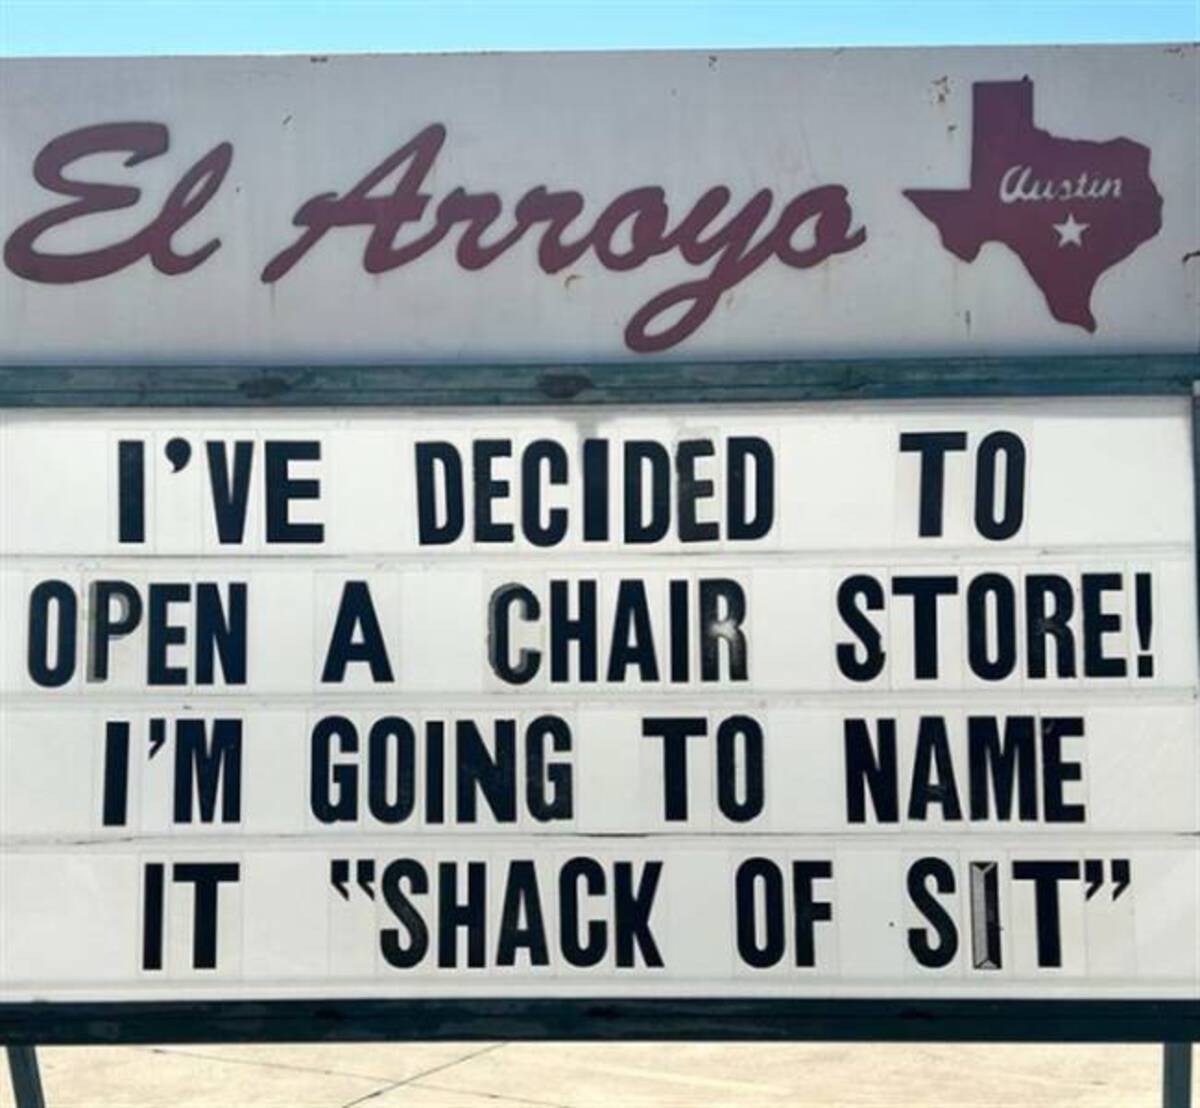 signage - El Arroyo Austin I'Ve Decided To Open A Chair Store! I'M Going To Name It "Shack Of Sit"